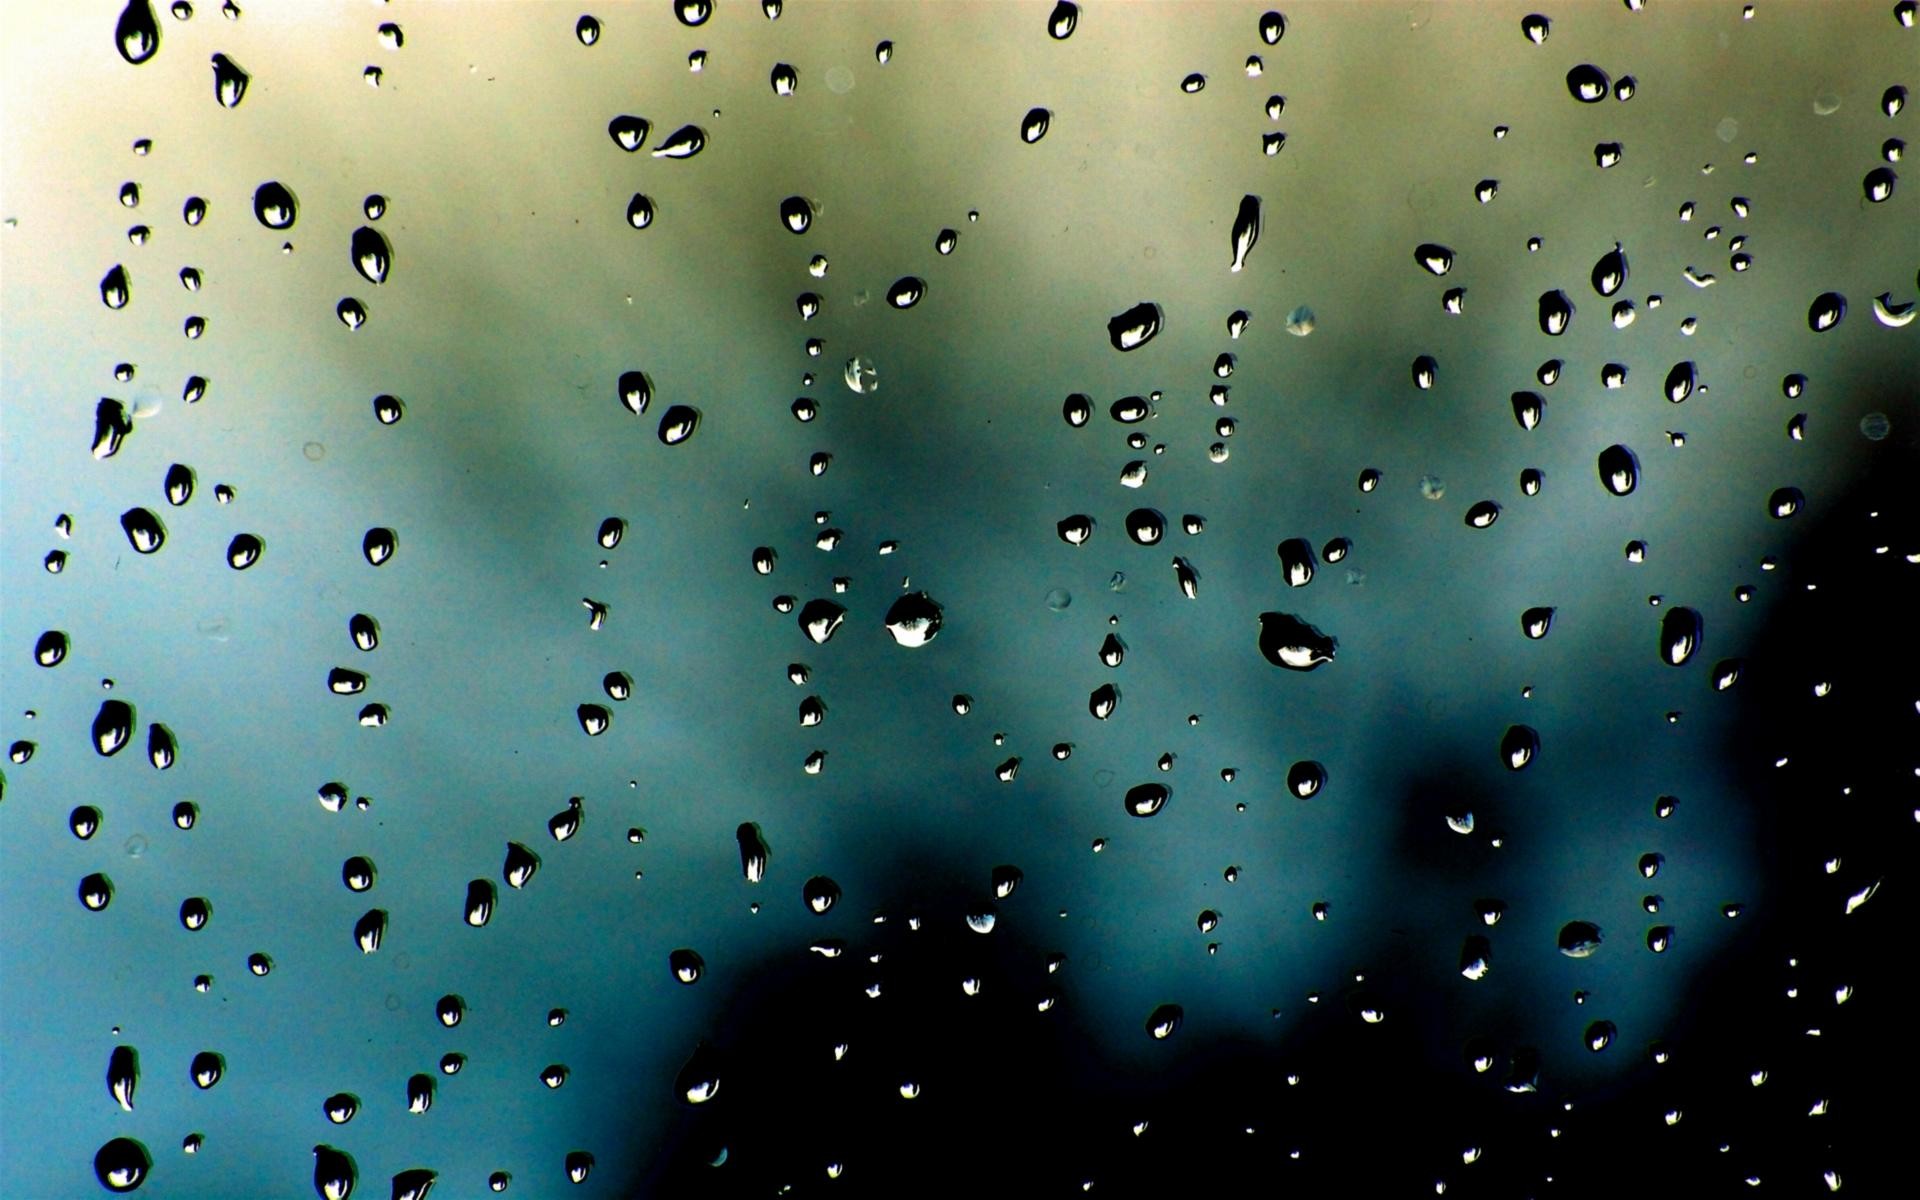 Water Drop Wallpaper 26136 Data-src /w/full/a/5/f/12737 - Hd Live Wallpapers  For Android Phones Free Download - 1920x1200 Wallpaper 